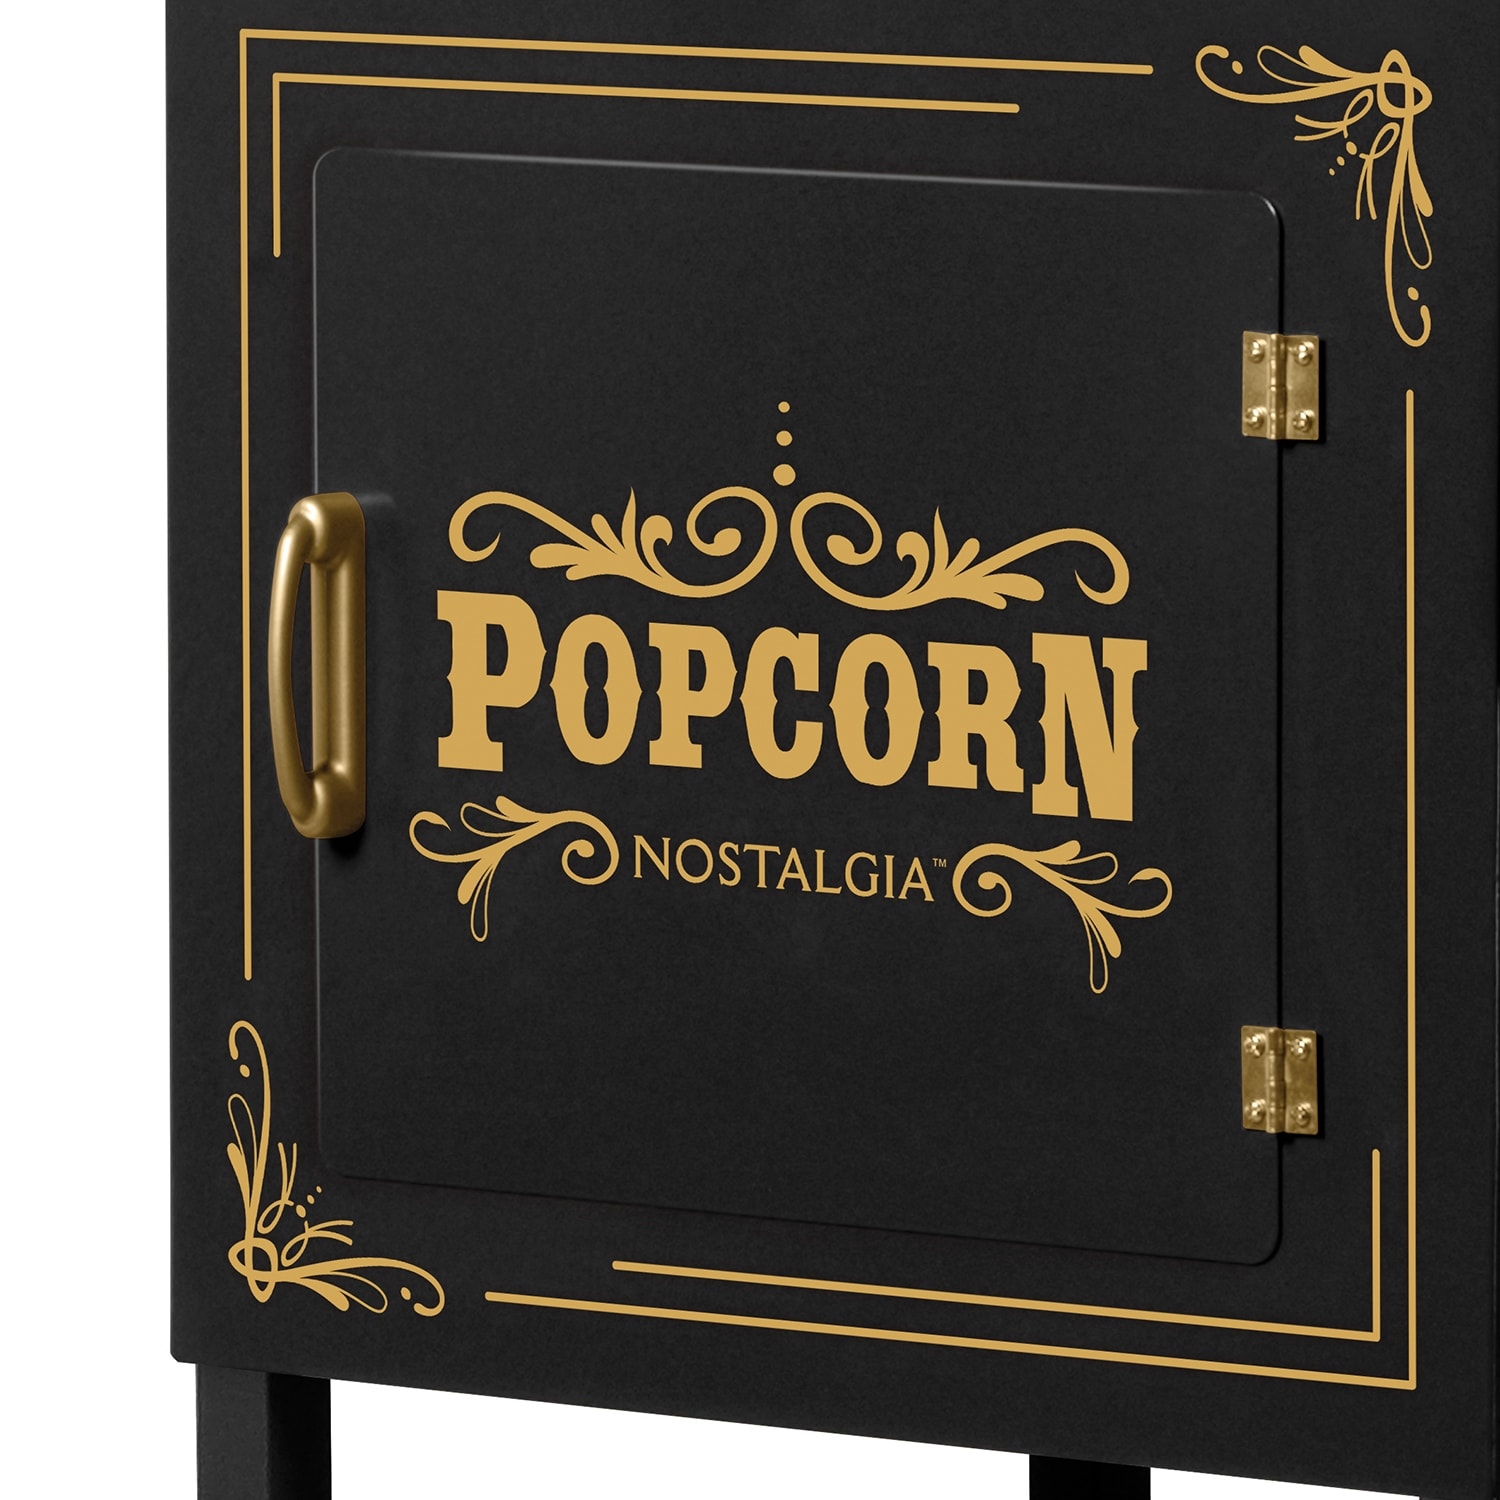 https://ak1.ostkcdn.com/images/products/is/images/direct/600c8a274dc48618bebecf147dd90042f30d10a8/Nostalgia-Vintage-10-Ounce-Vintage-Professional-Popcorn-Cart---59-Inches-Tall.jpg